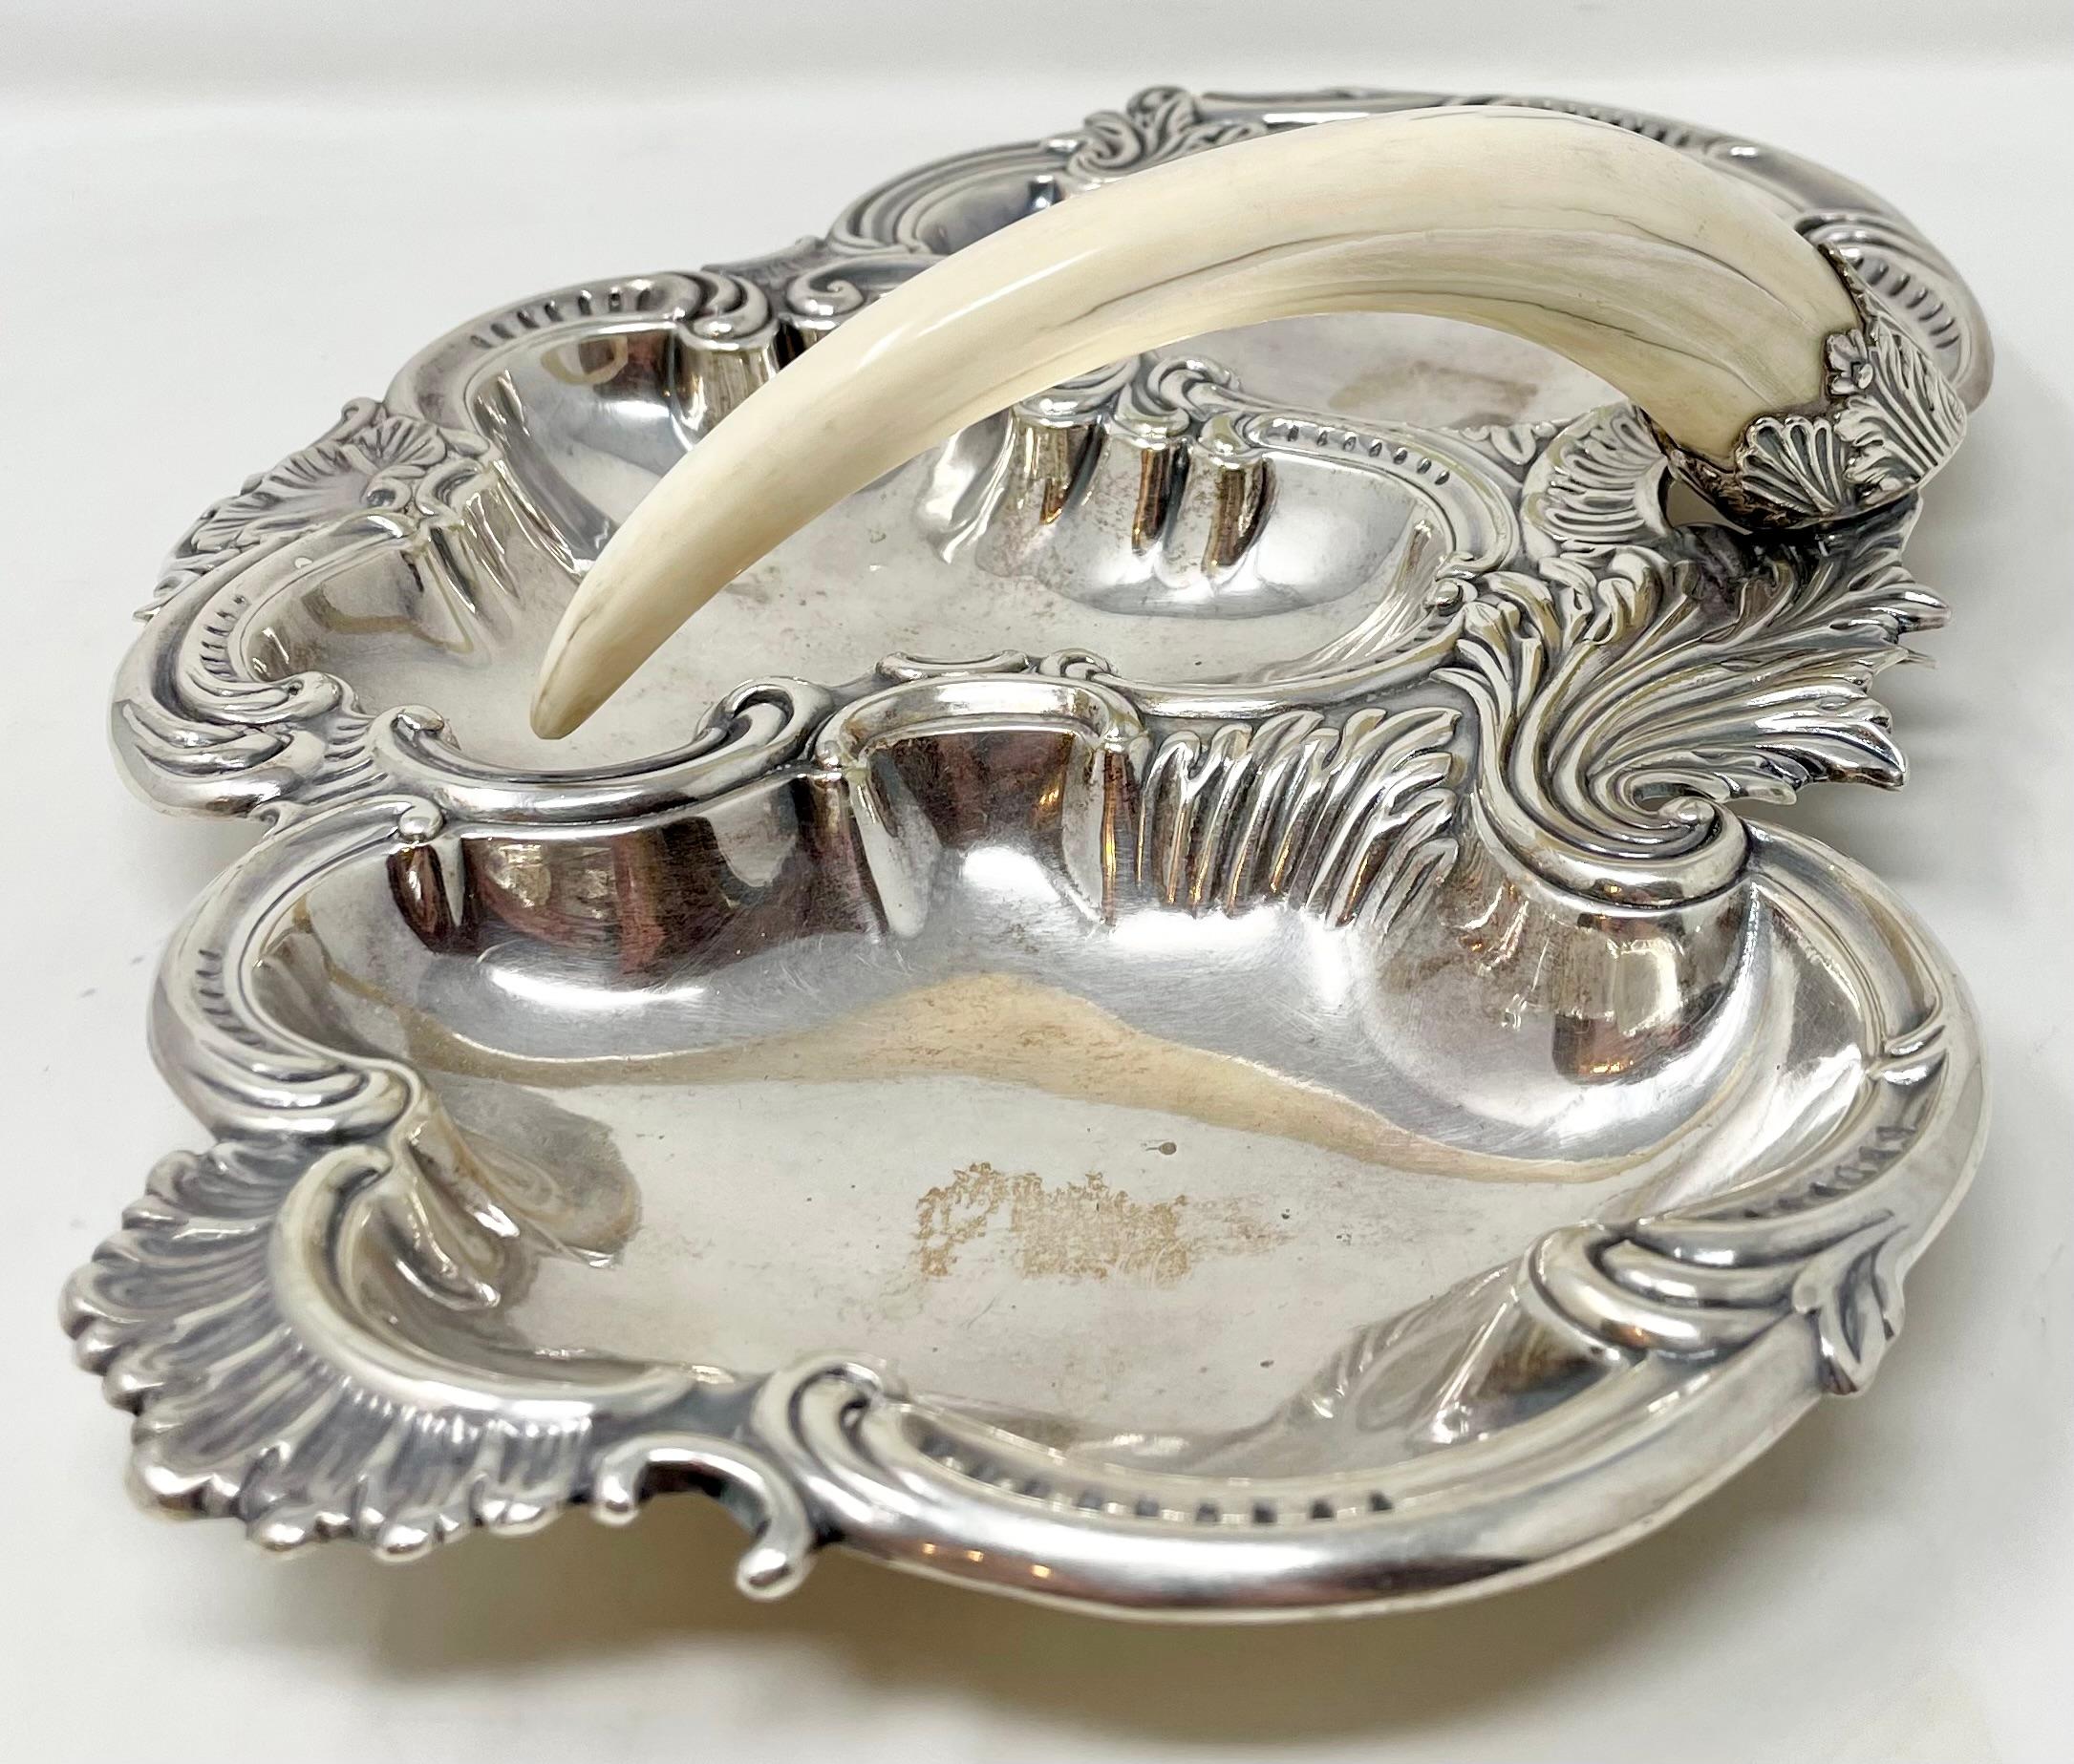 Silver Plate Antique English Sheffield Silver-Plate and Boar's Tusk Serving Dish, Circa 1900.